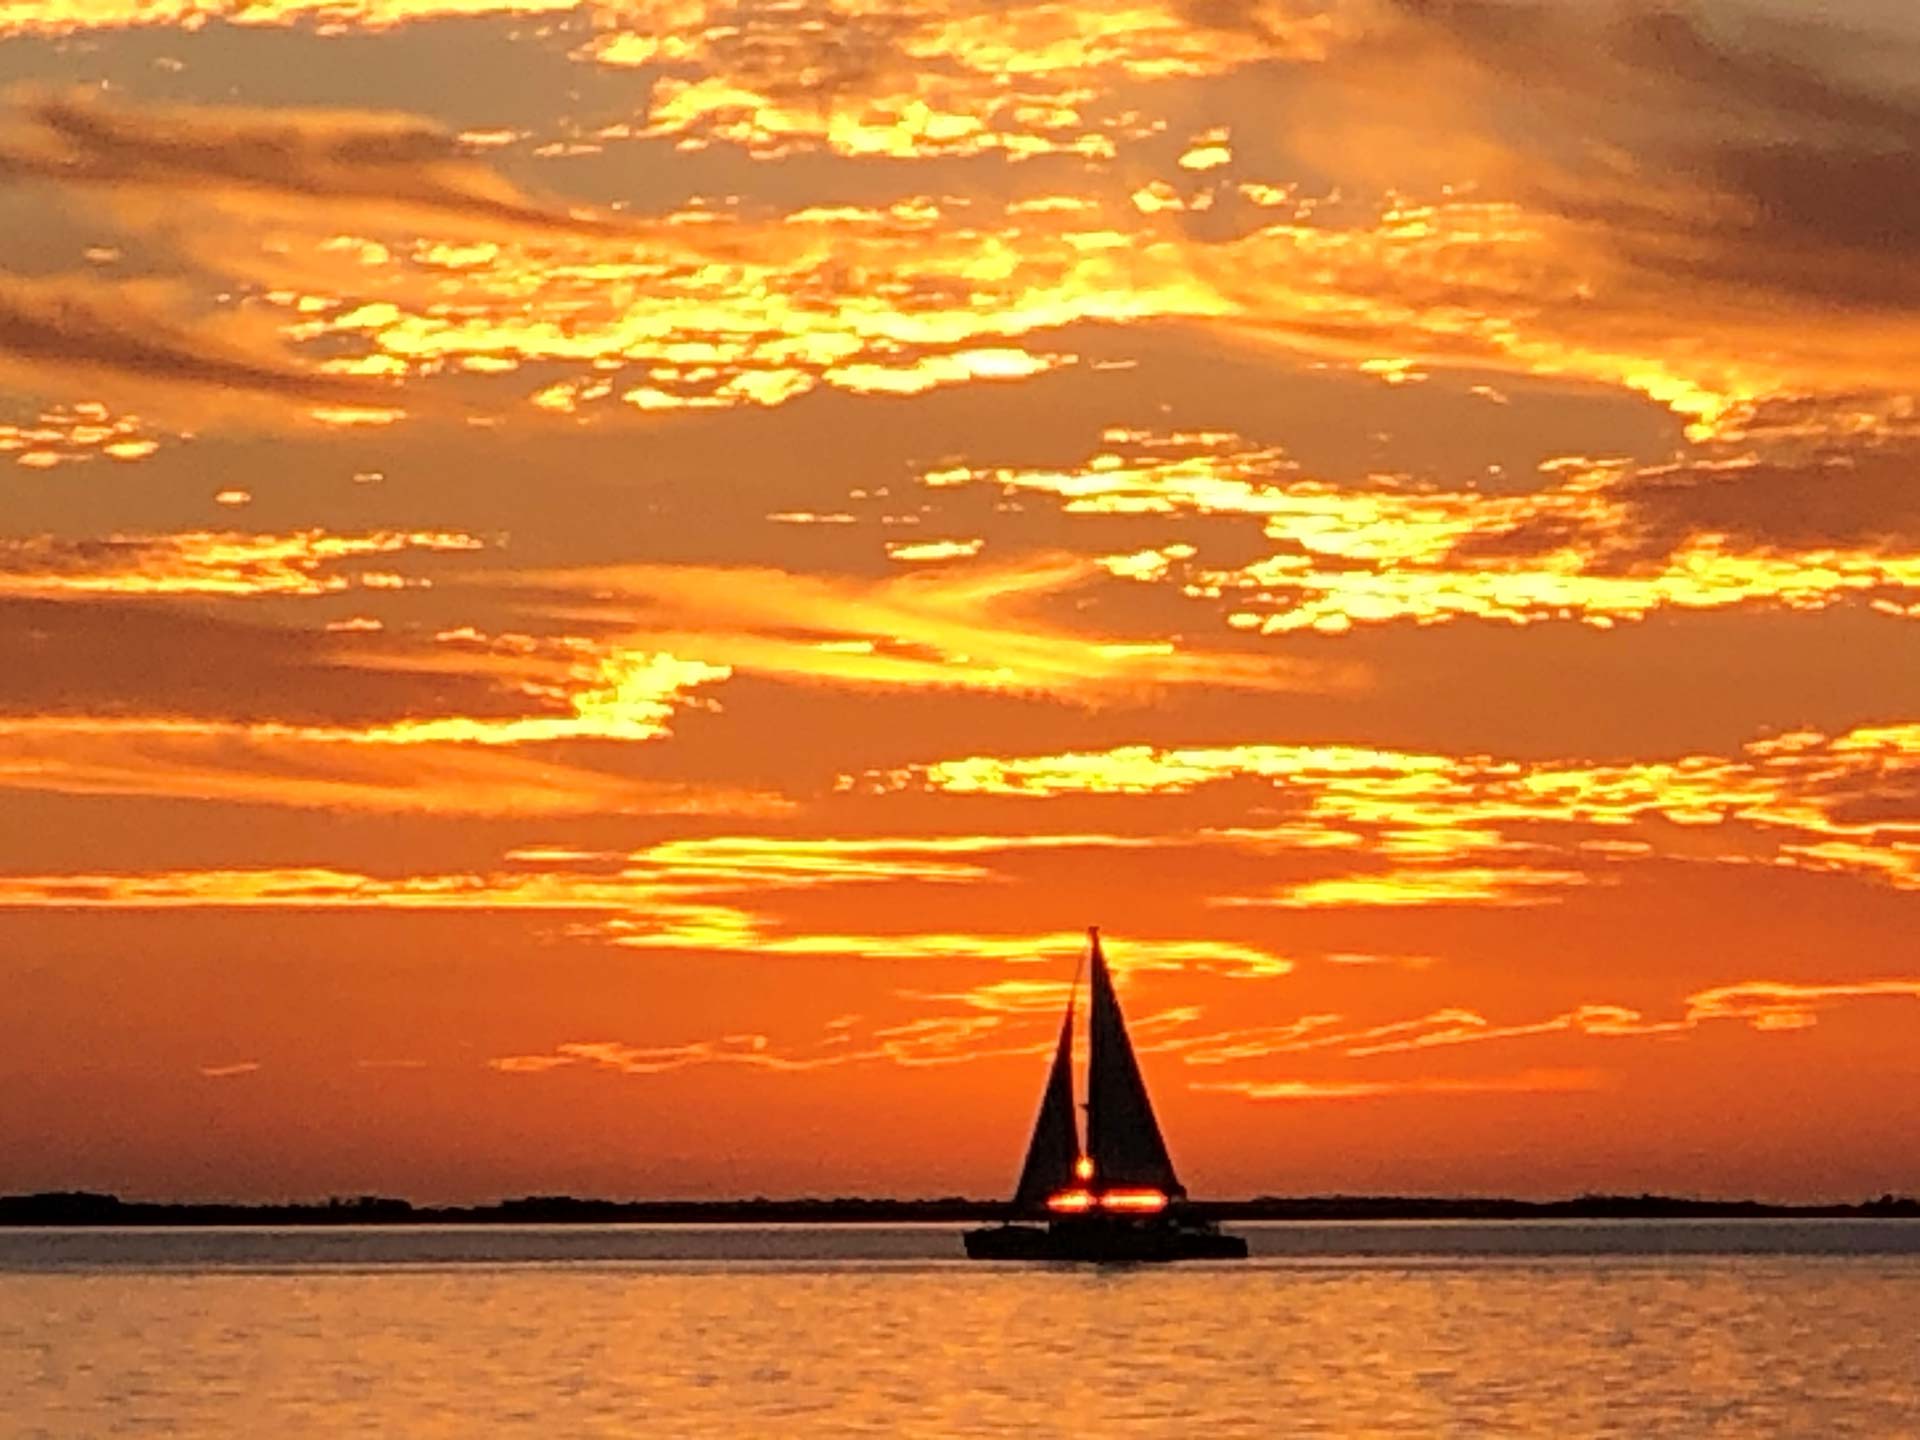 sailboat on the ocean at sunset